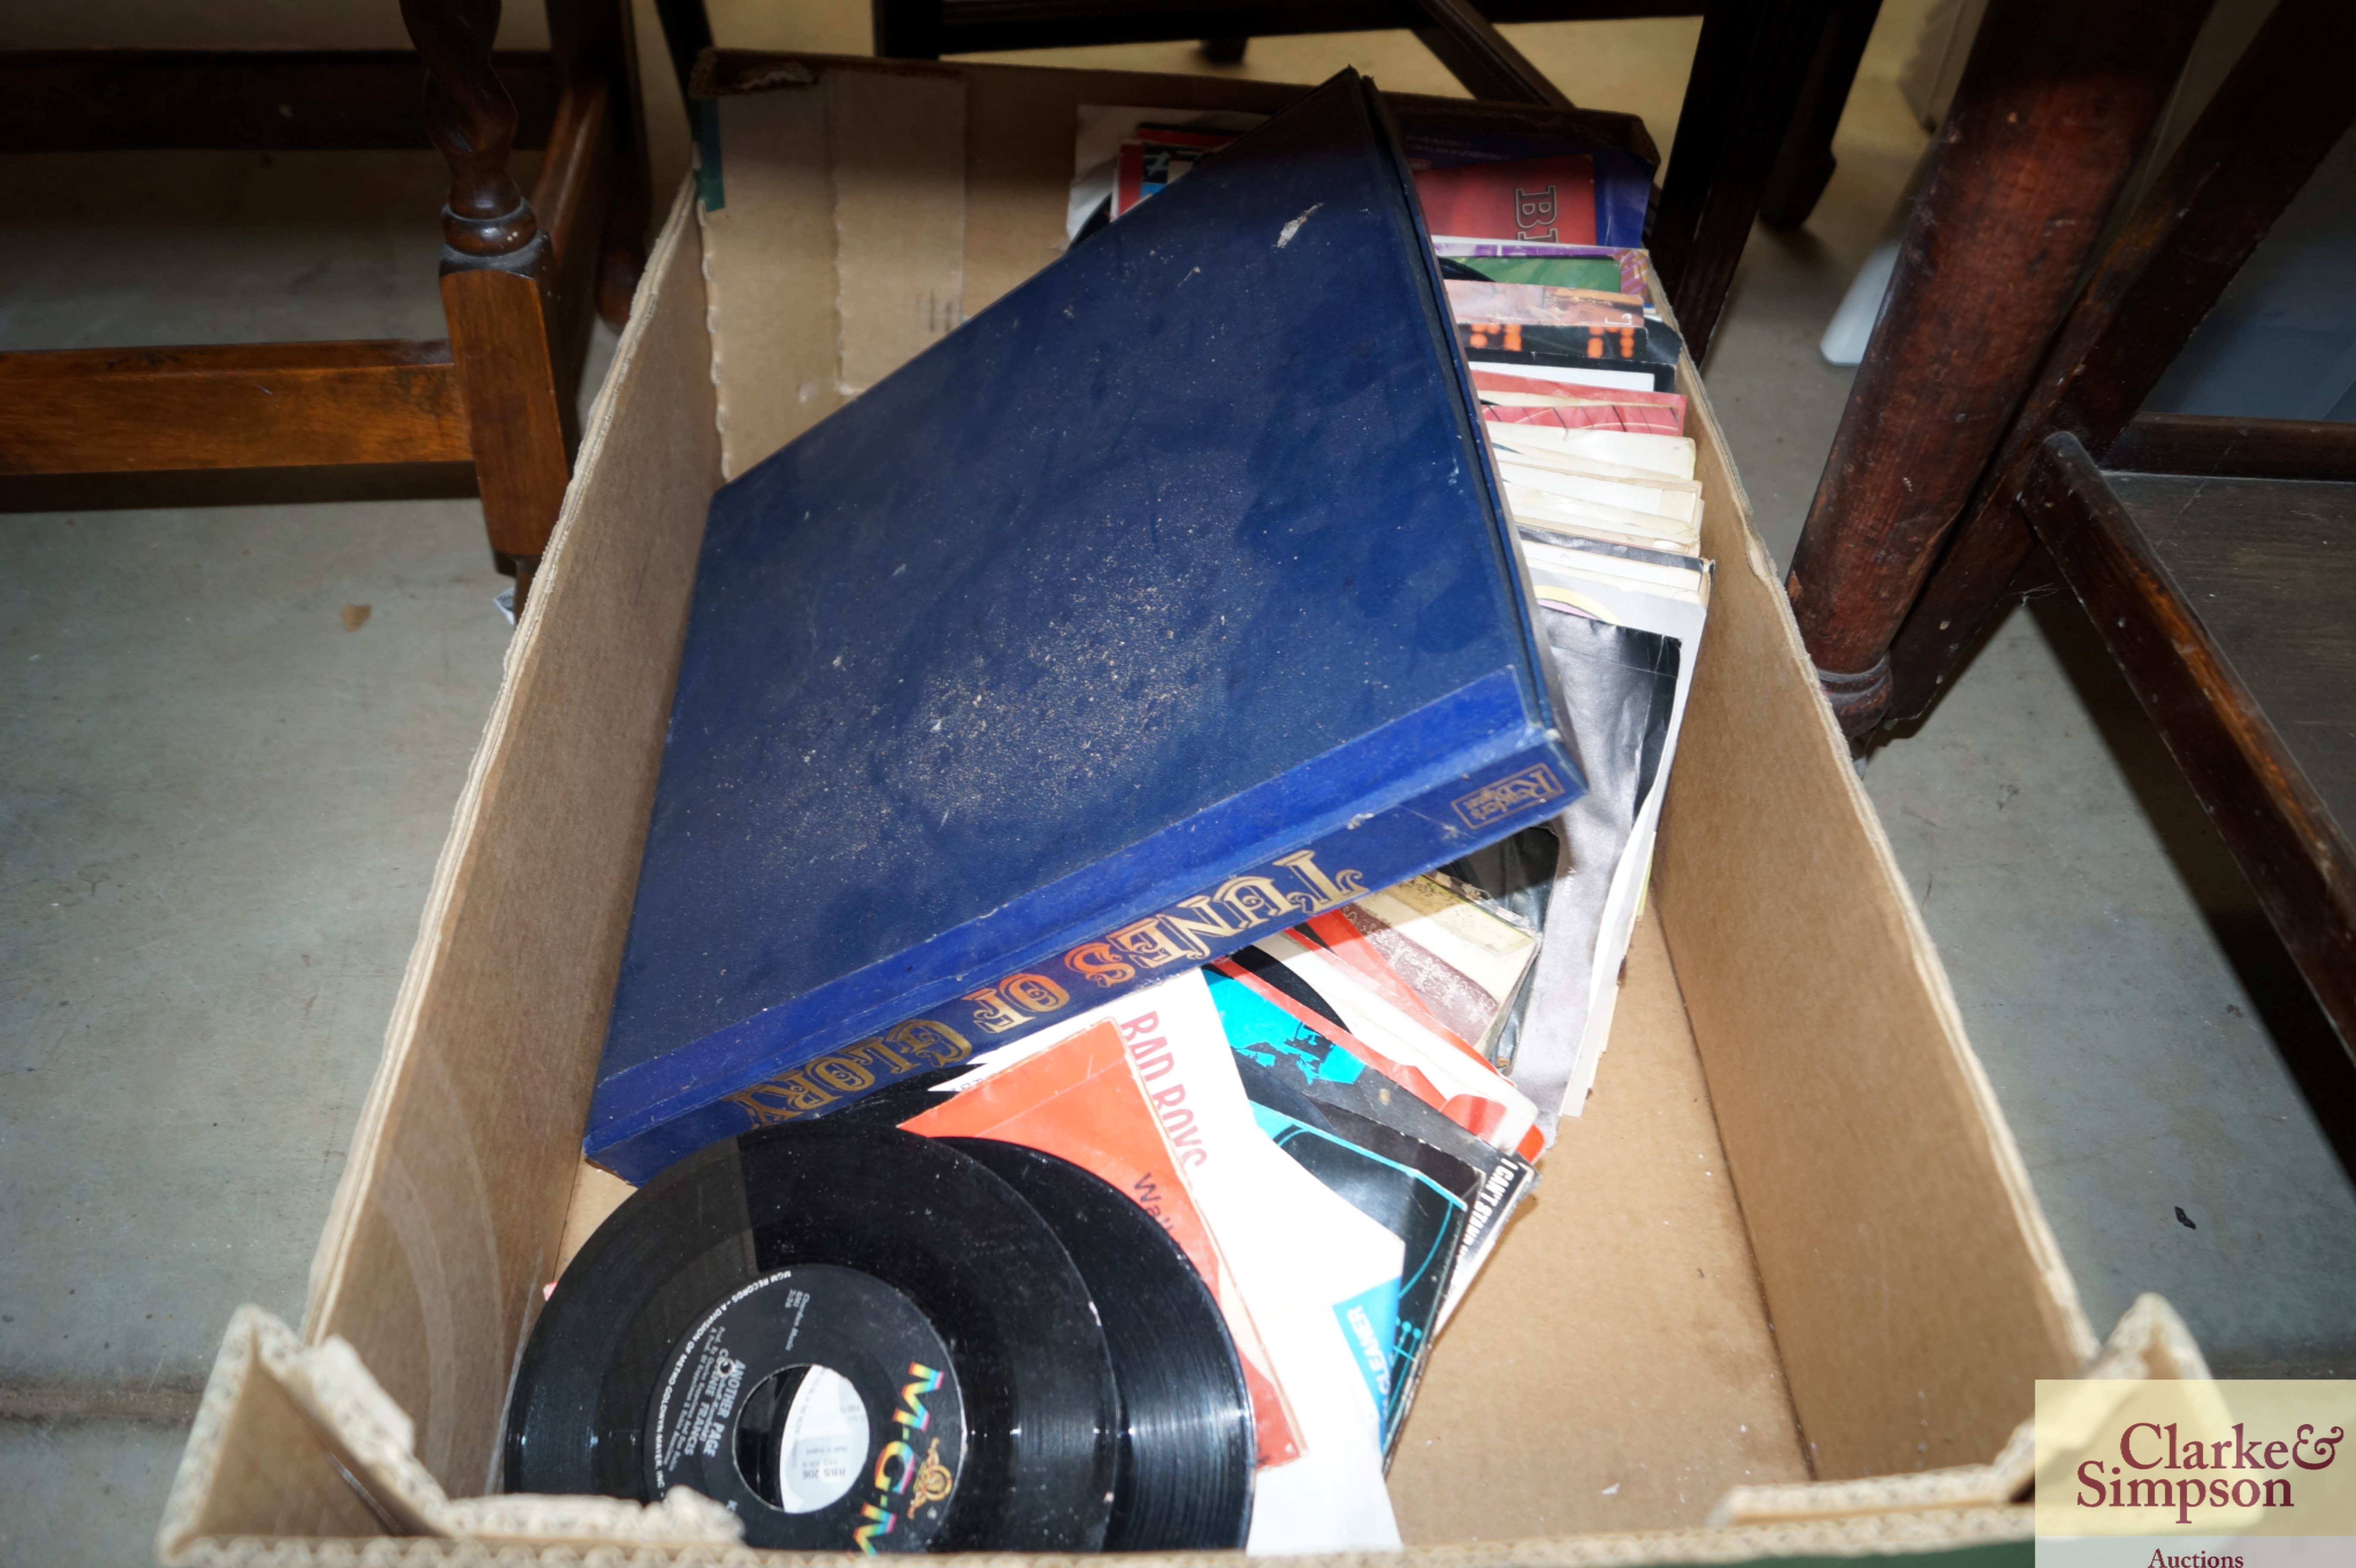 A box containing various LP's